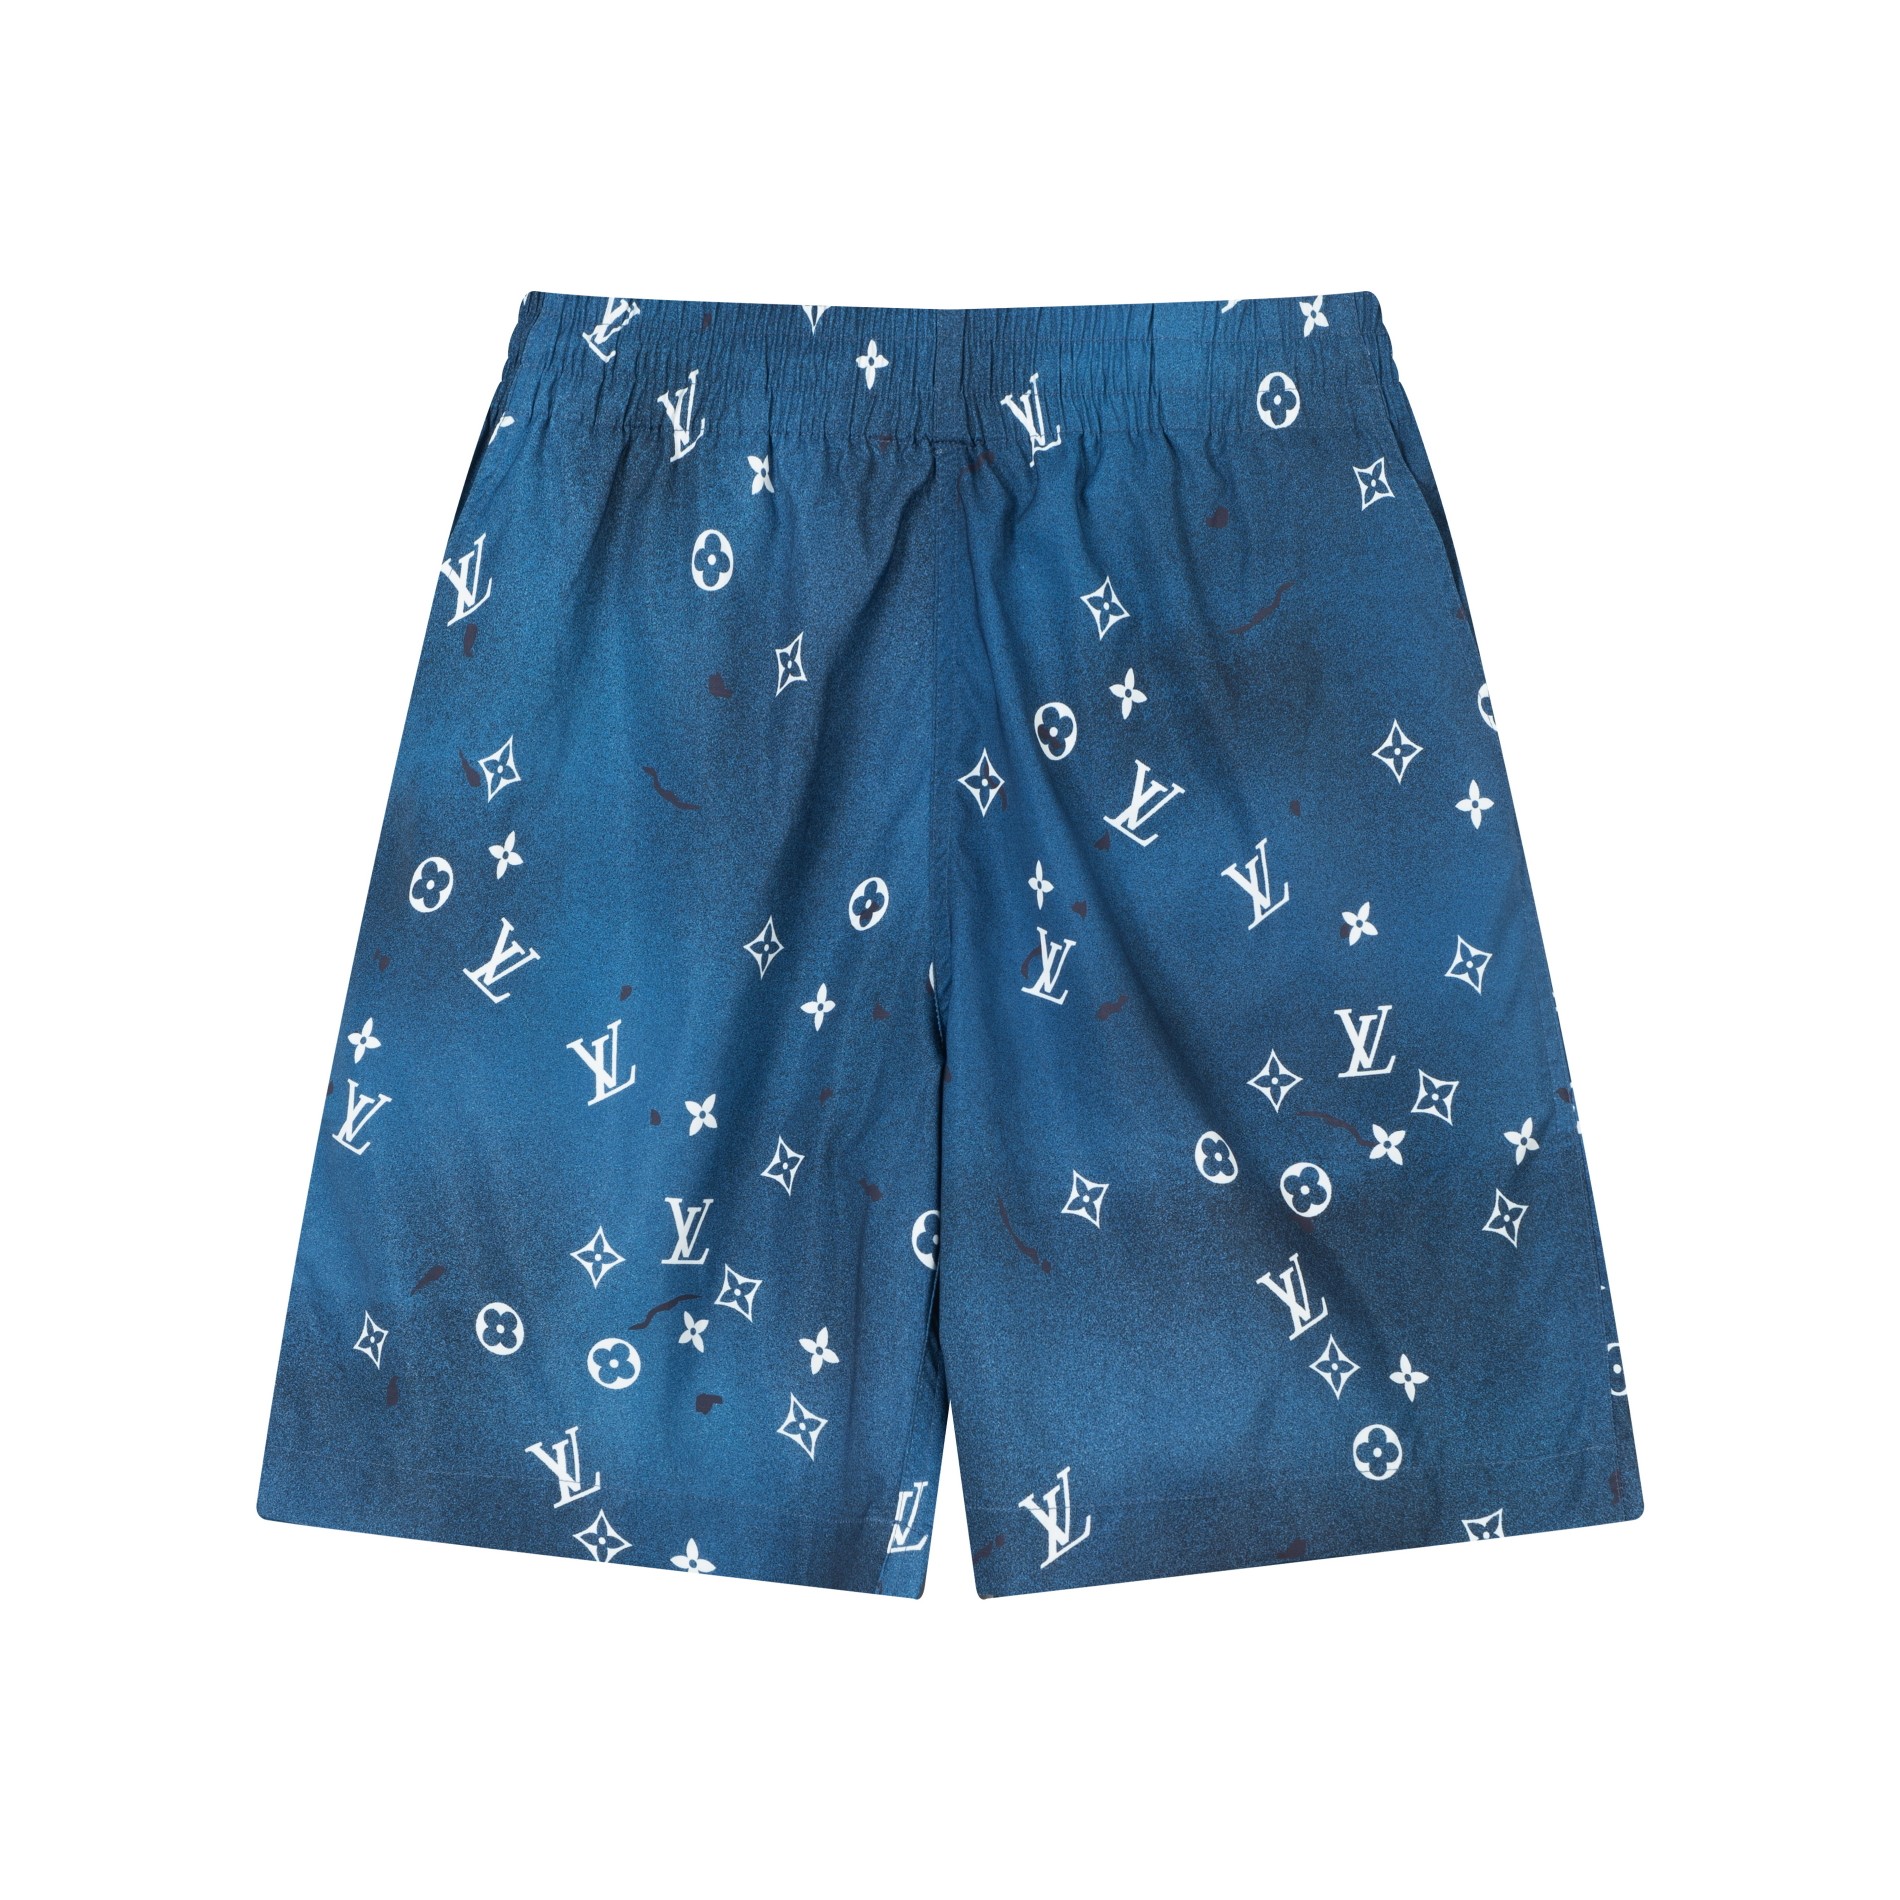 Louis Vuitton Clothing Shorts Blue Polyester Summer Collection Fashion Beach